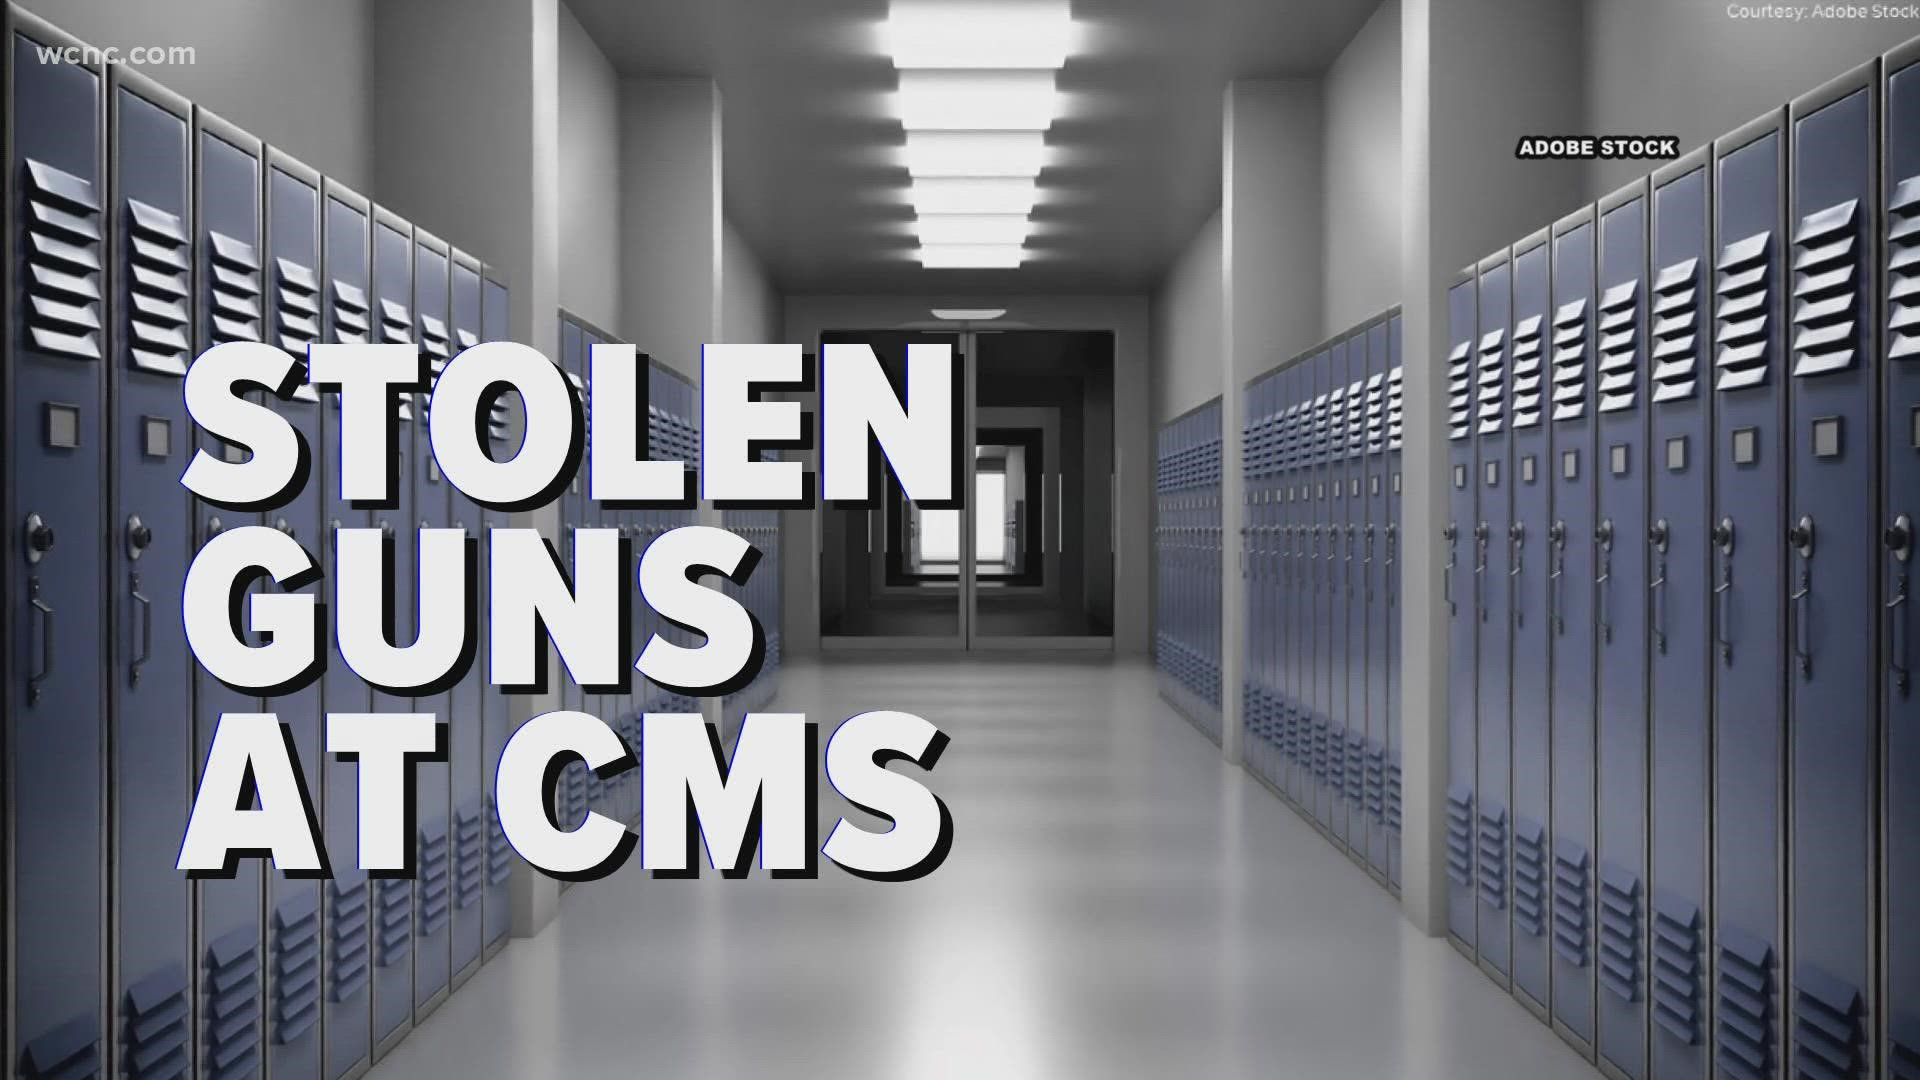 From South End to Shelby, a WCNC Charlotte Defenders investigation tracked down the origins of some of the 23 guns found at CMS so far this school year.